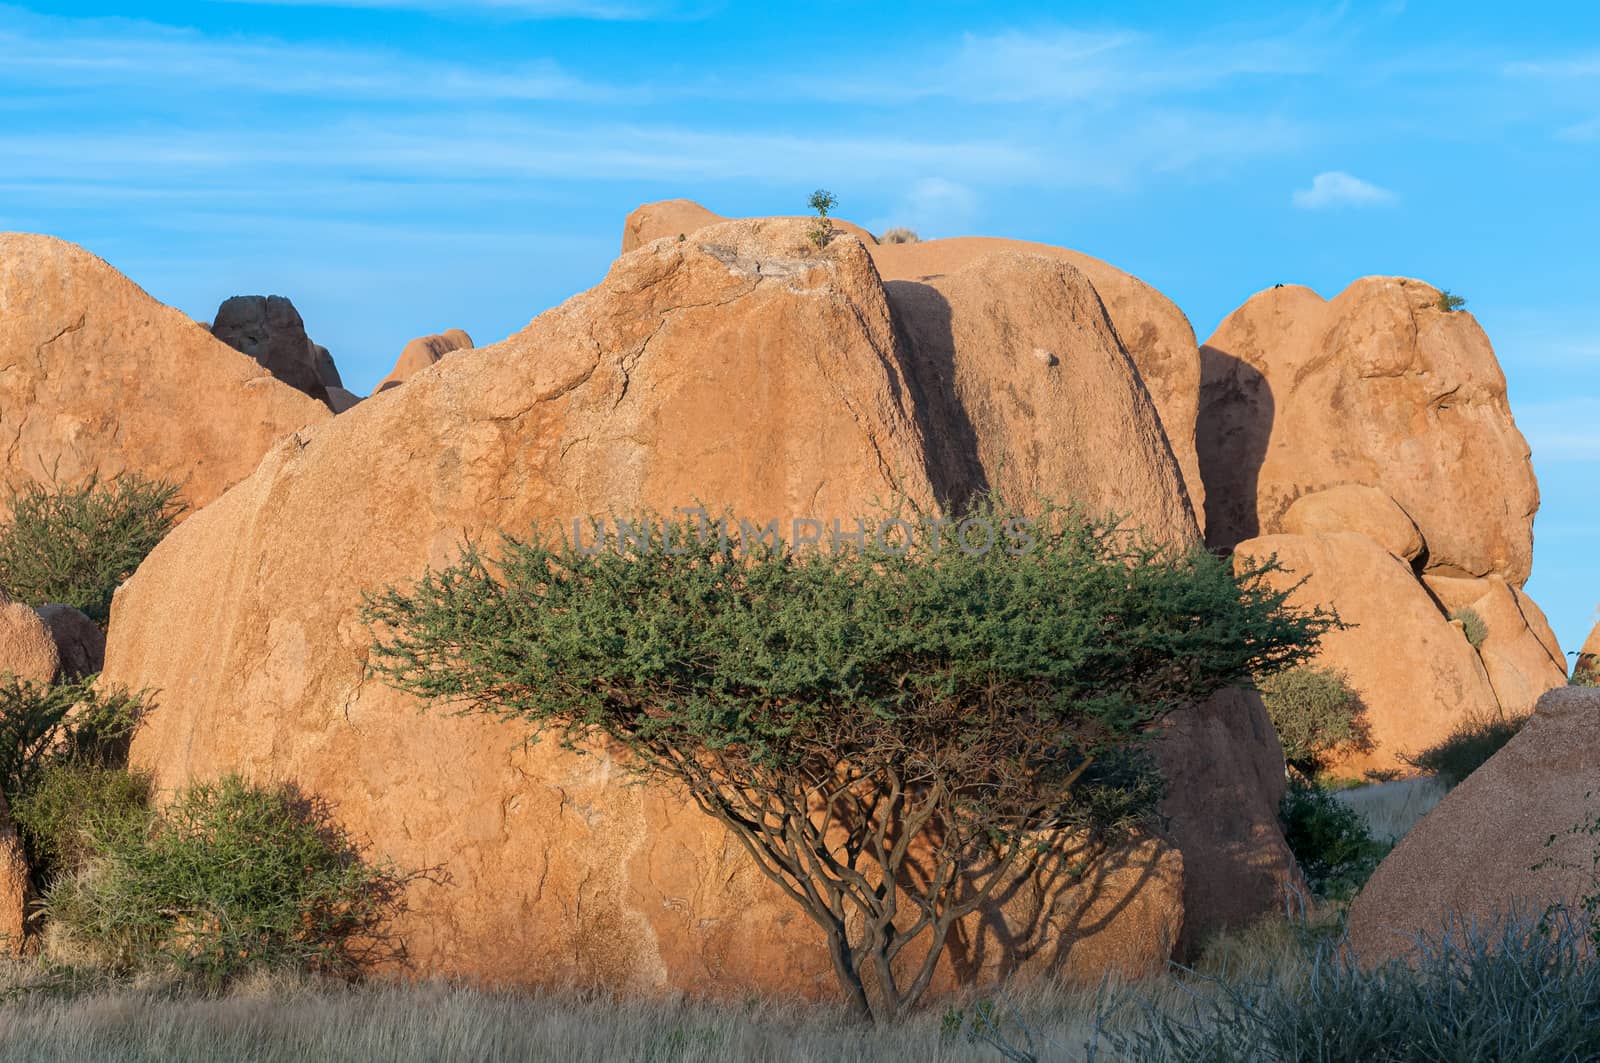 Granite boulders and a tree at the greater Spitzkoppe by dpreezg